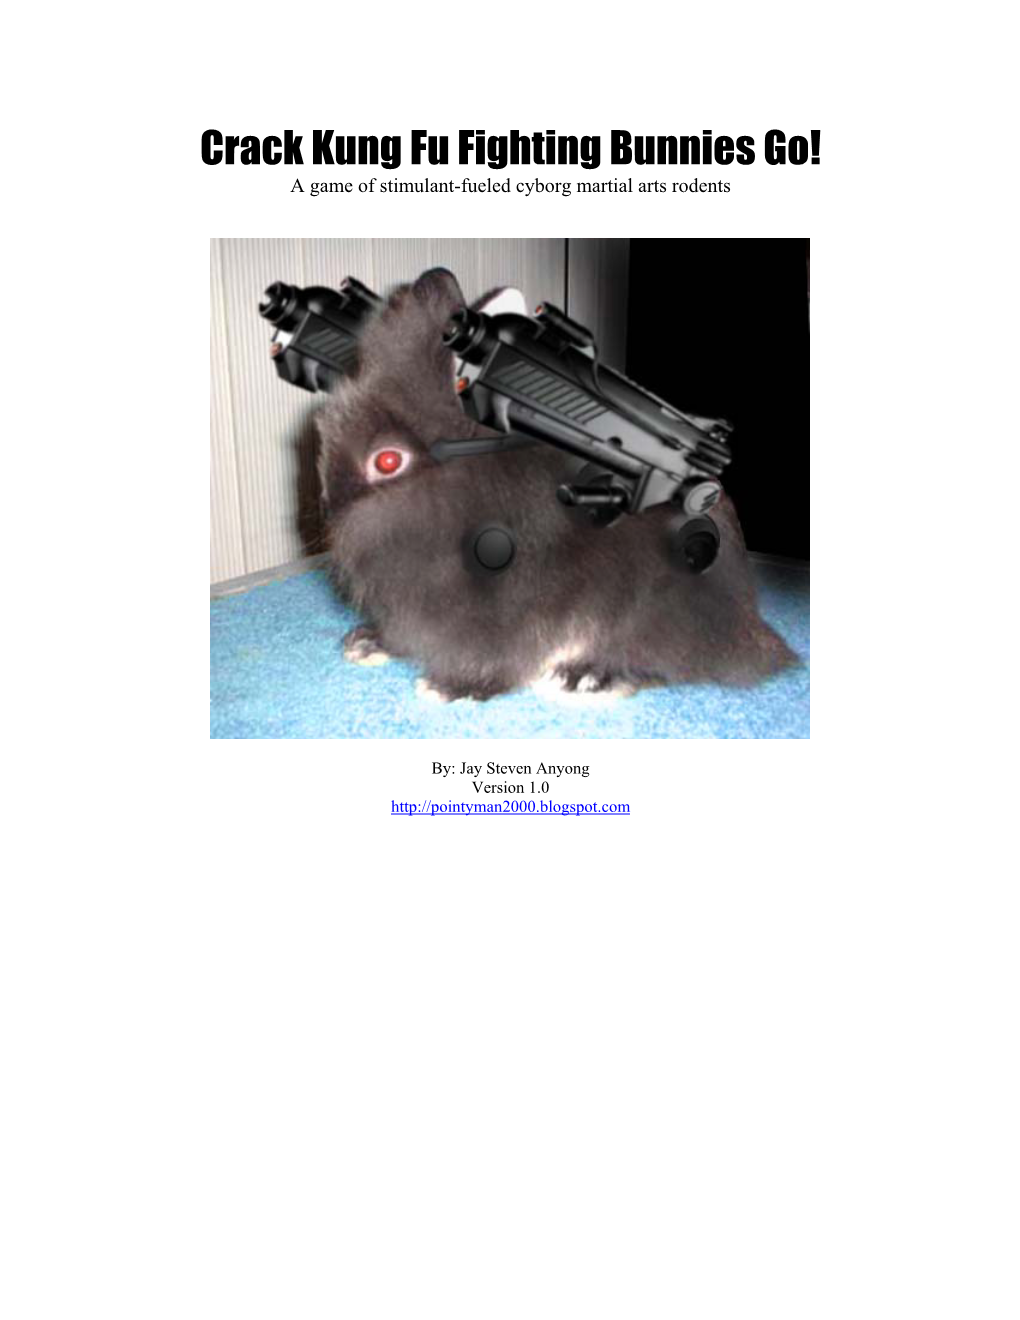 Crack Kung Fu Fighting Bunnies Go! a Game of Stimulant-Fueled Cyborg Martial Arts Rodents